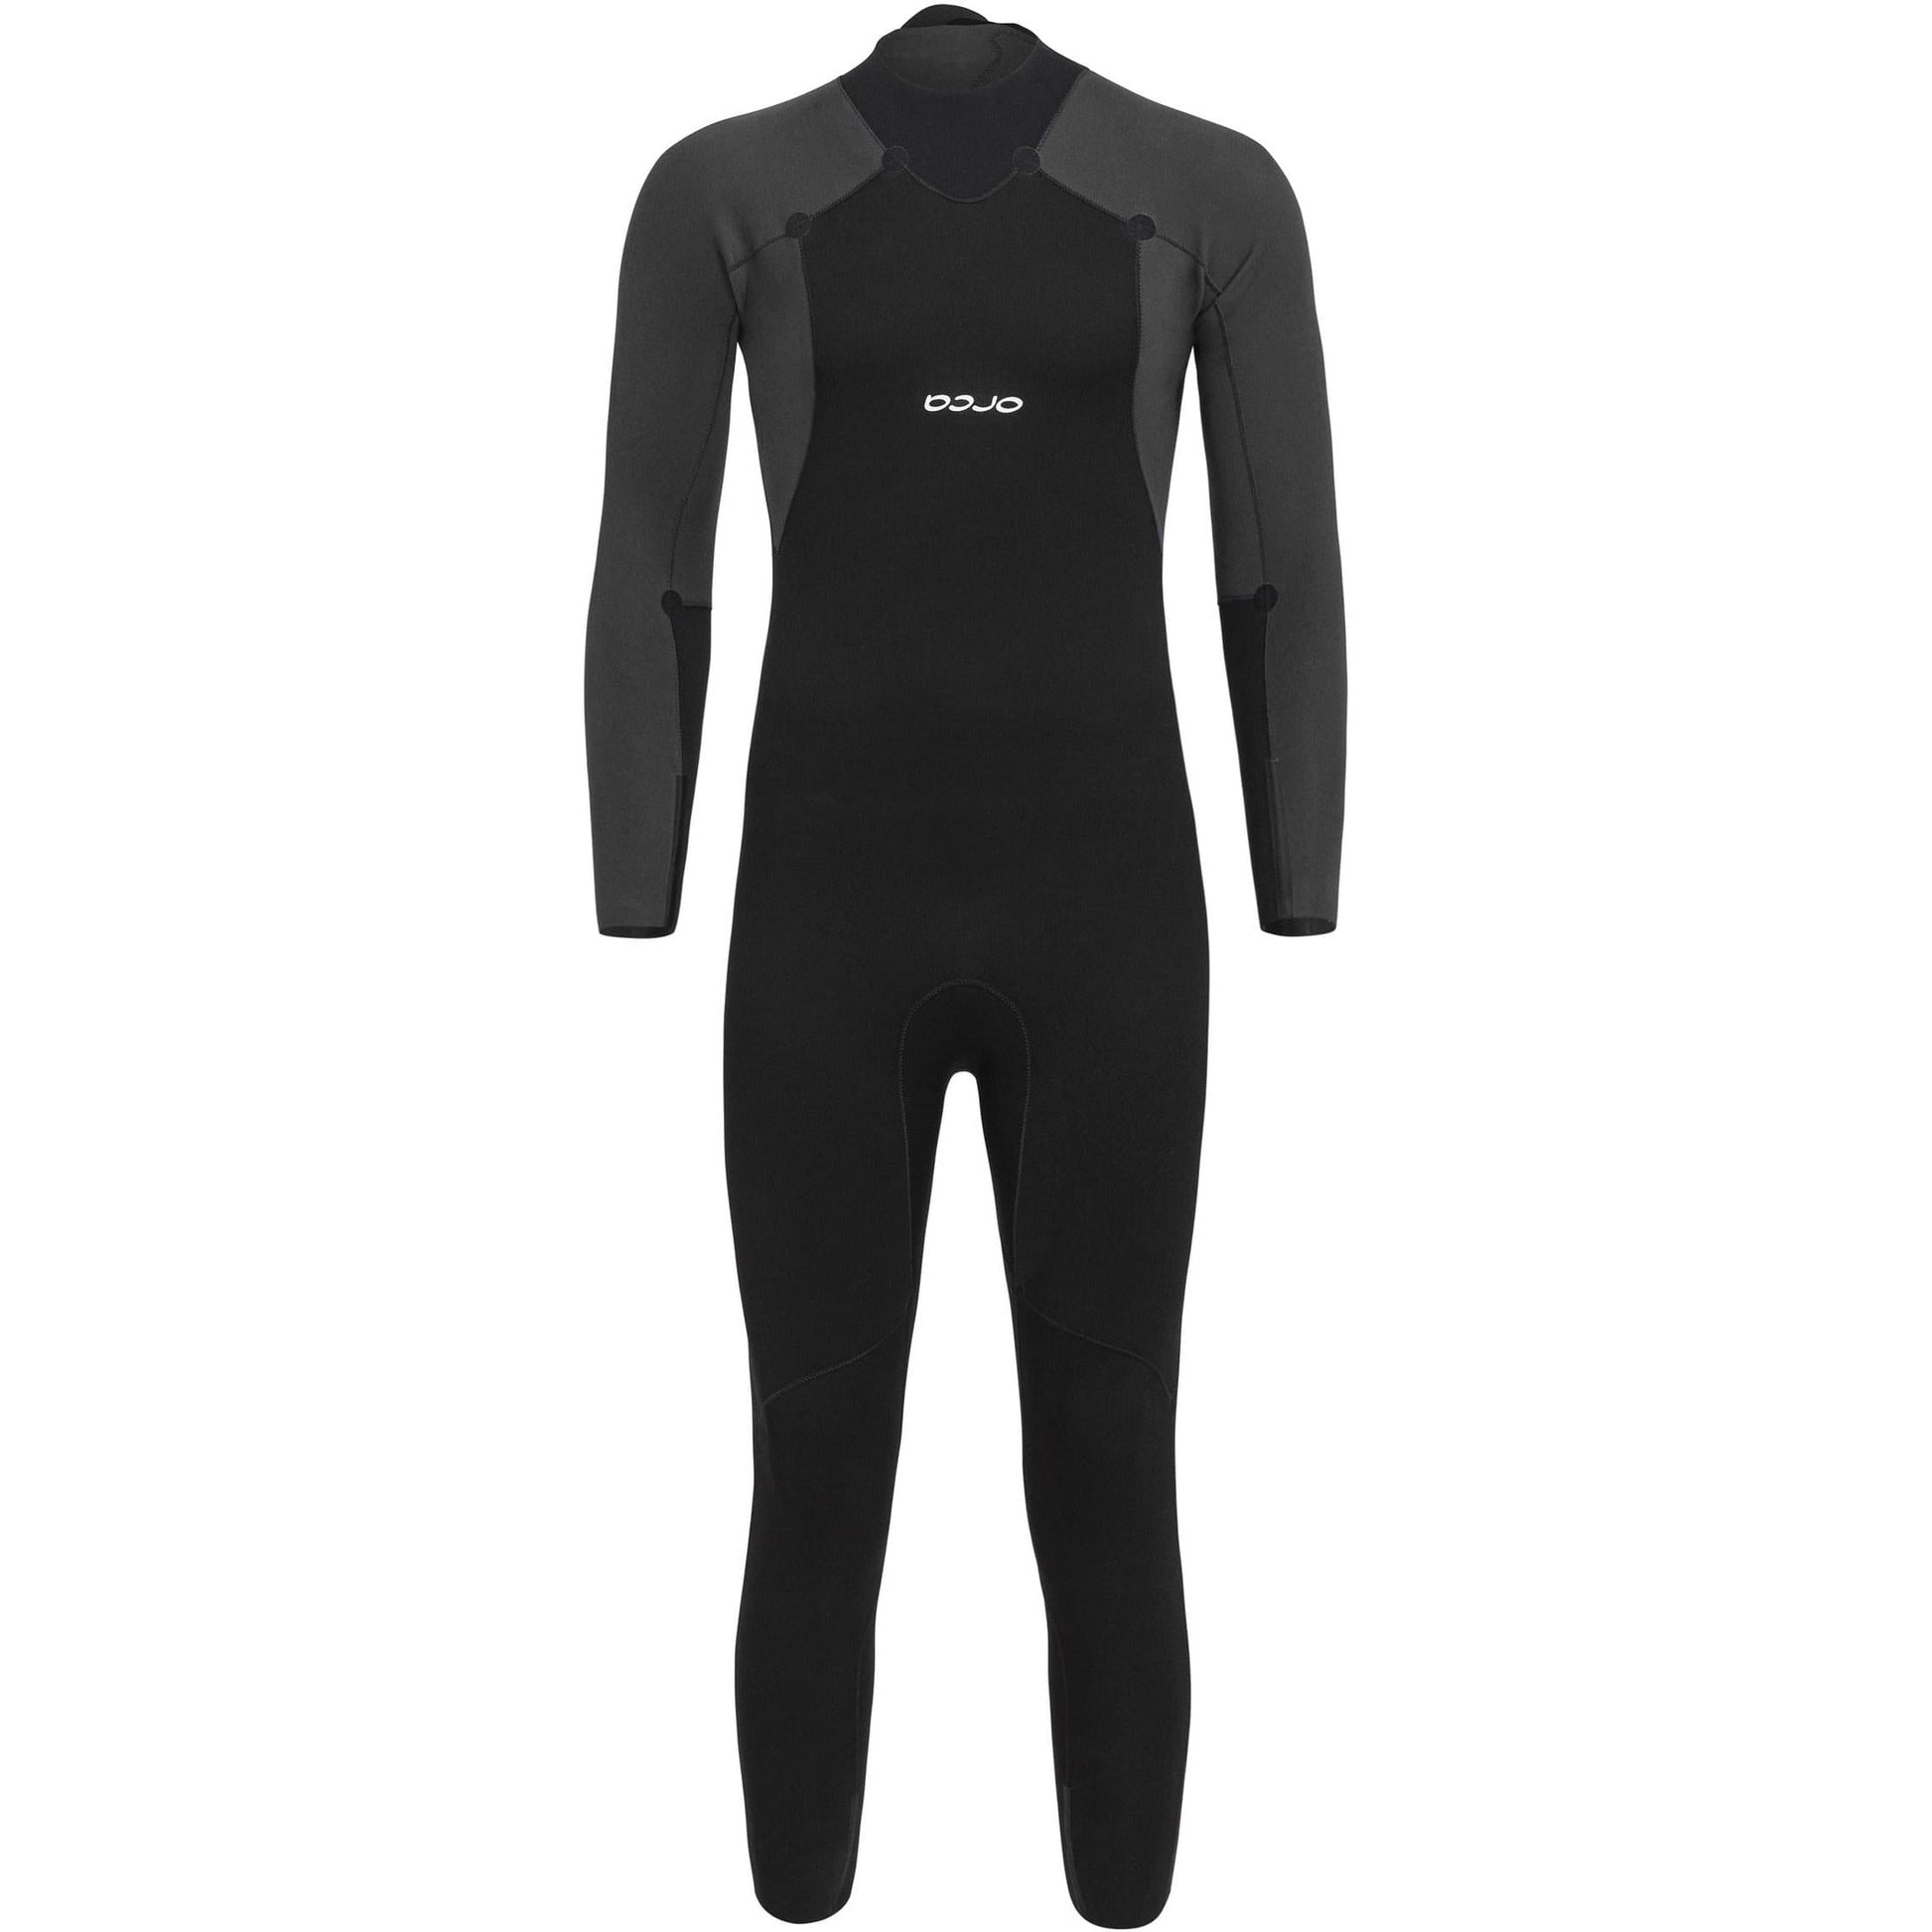 Orca Vitalis Trn Openwater Wetsuit Nn28 Inside Front - Front View